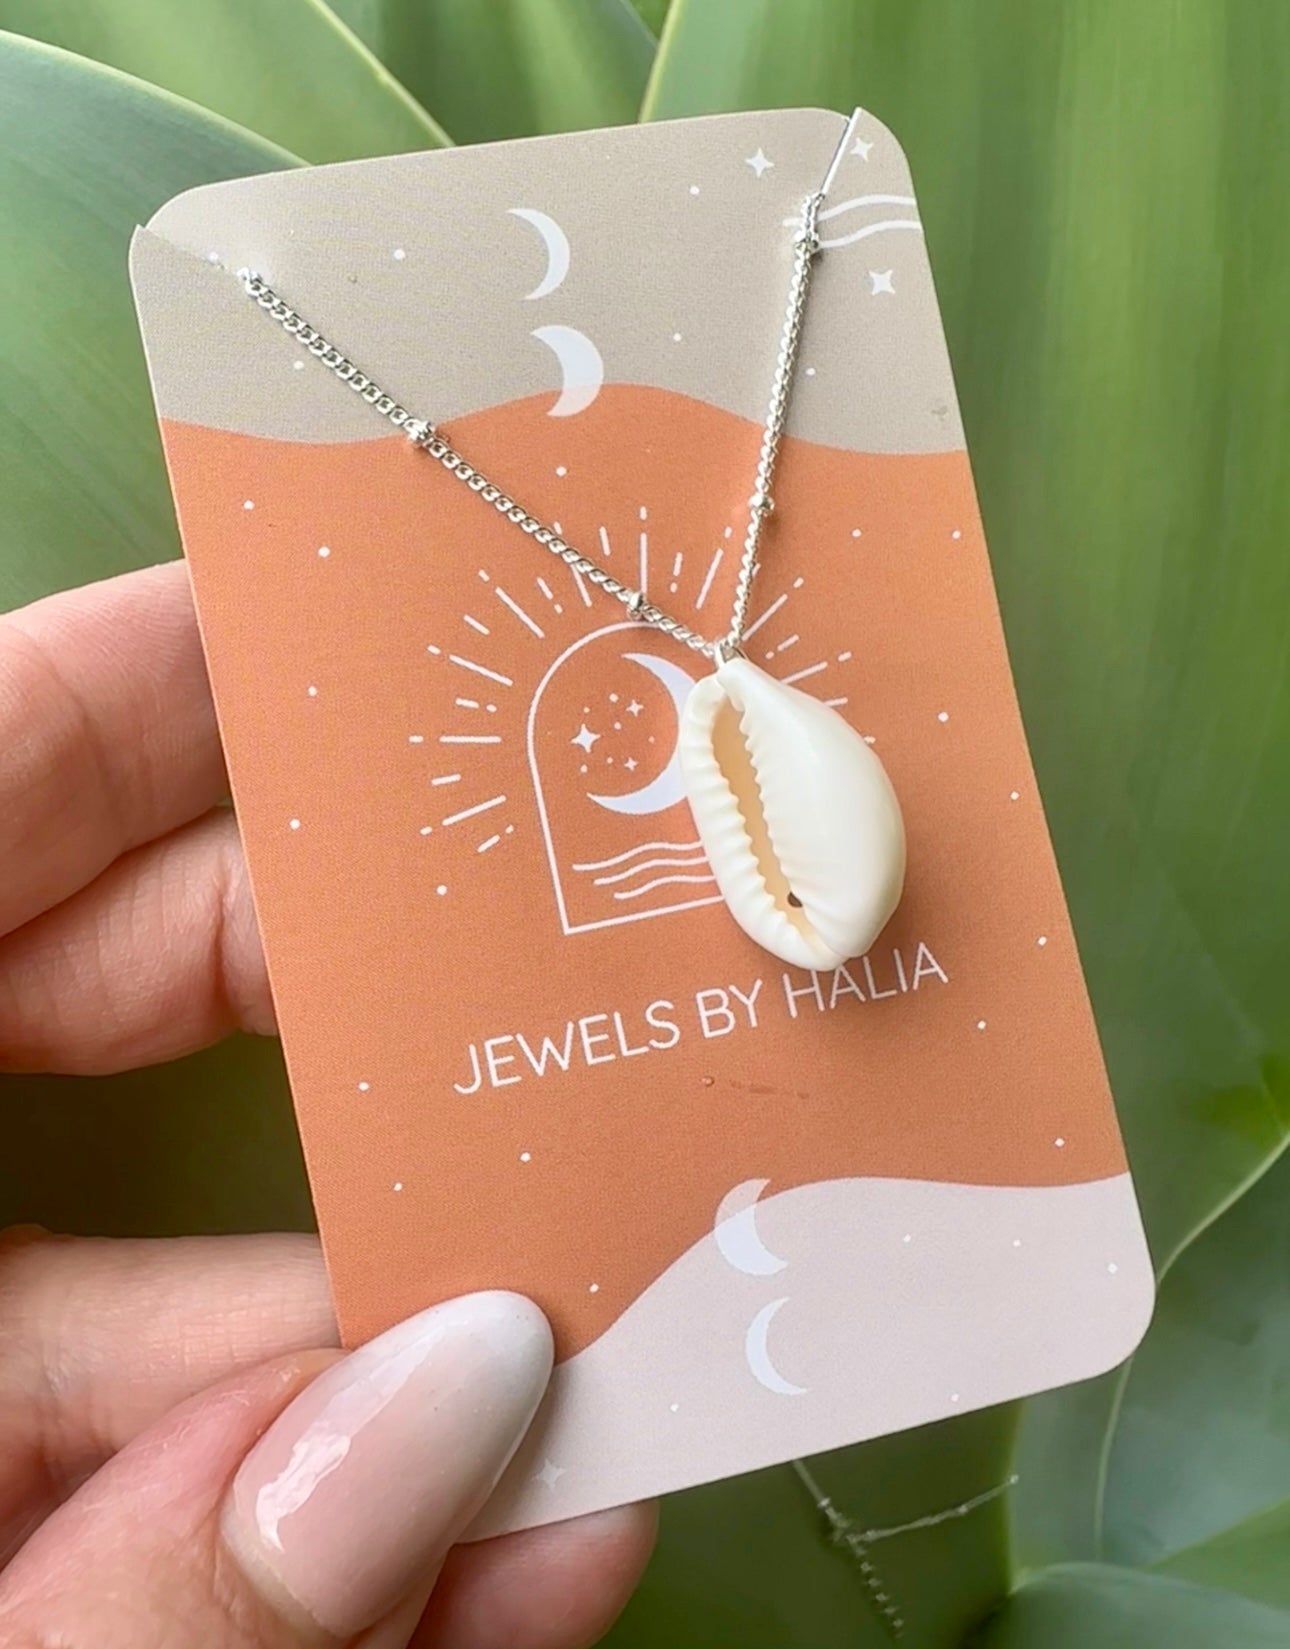 Cowrie Shell Silver Necklace